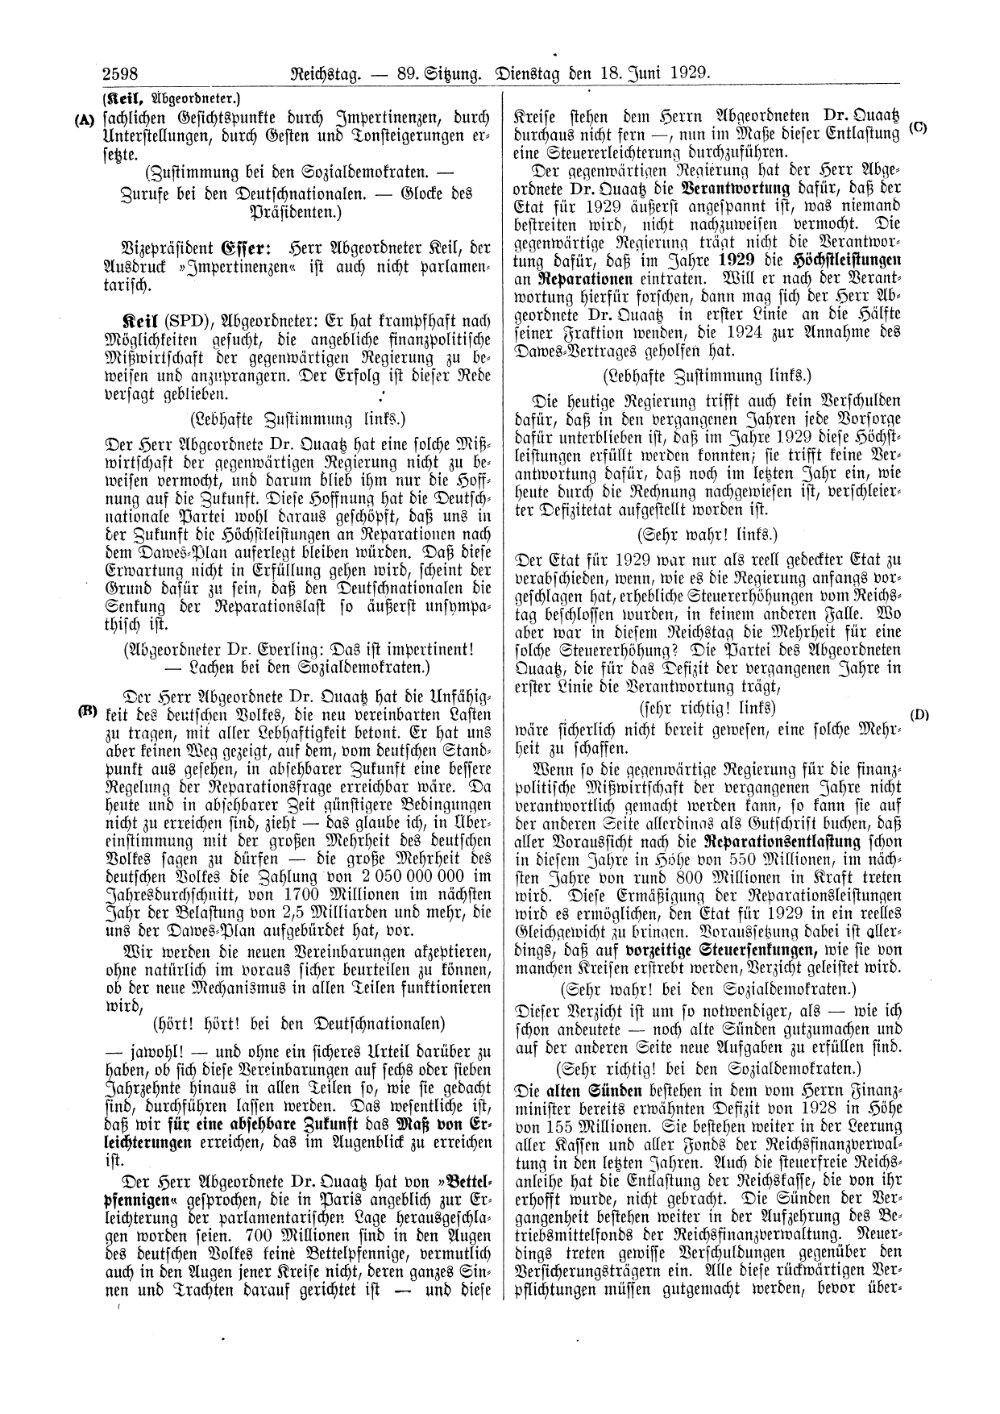 Scan of page 2598